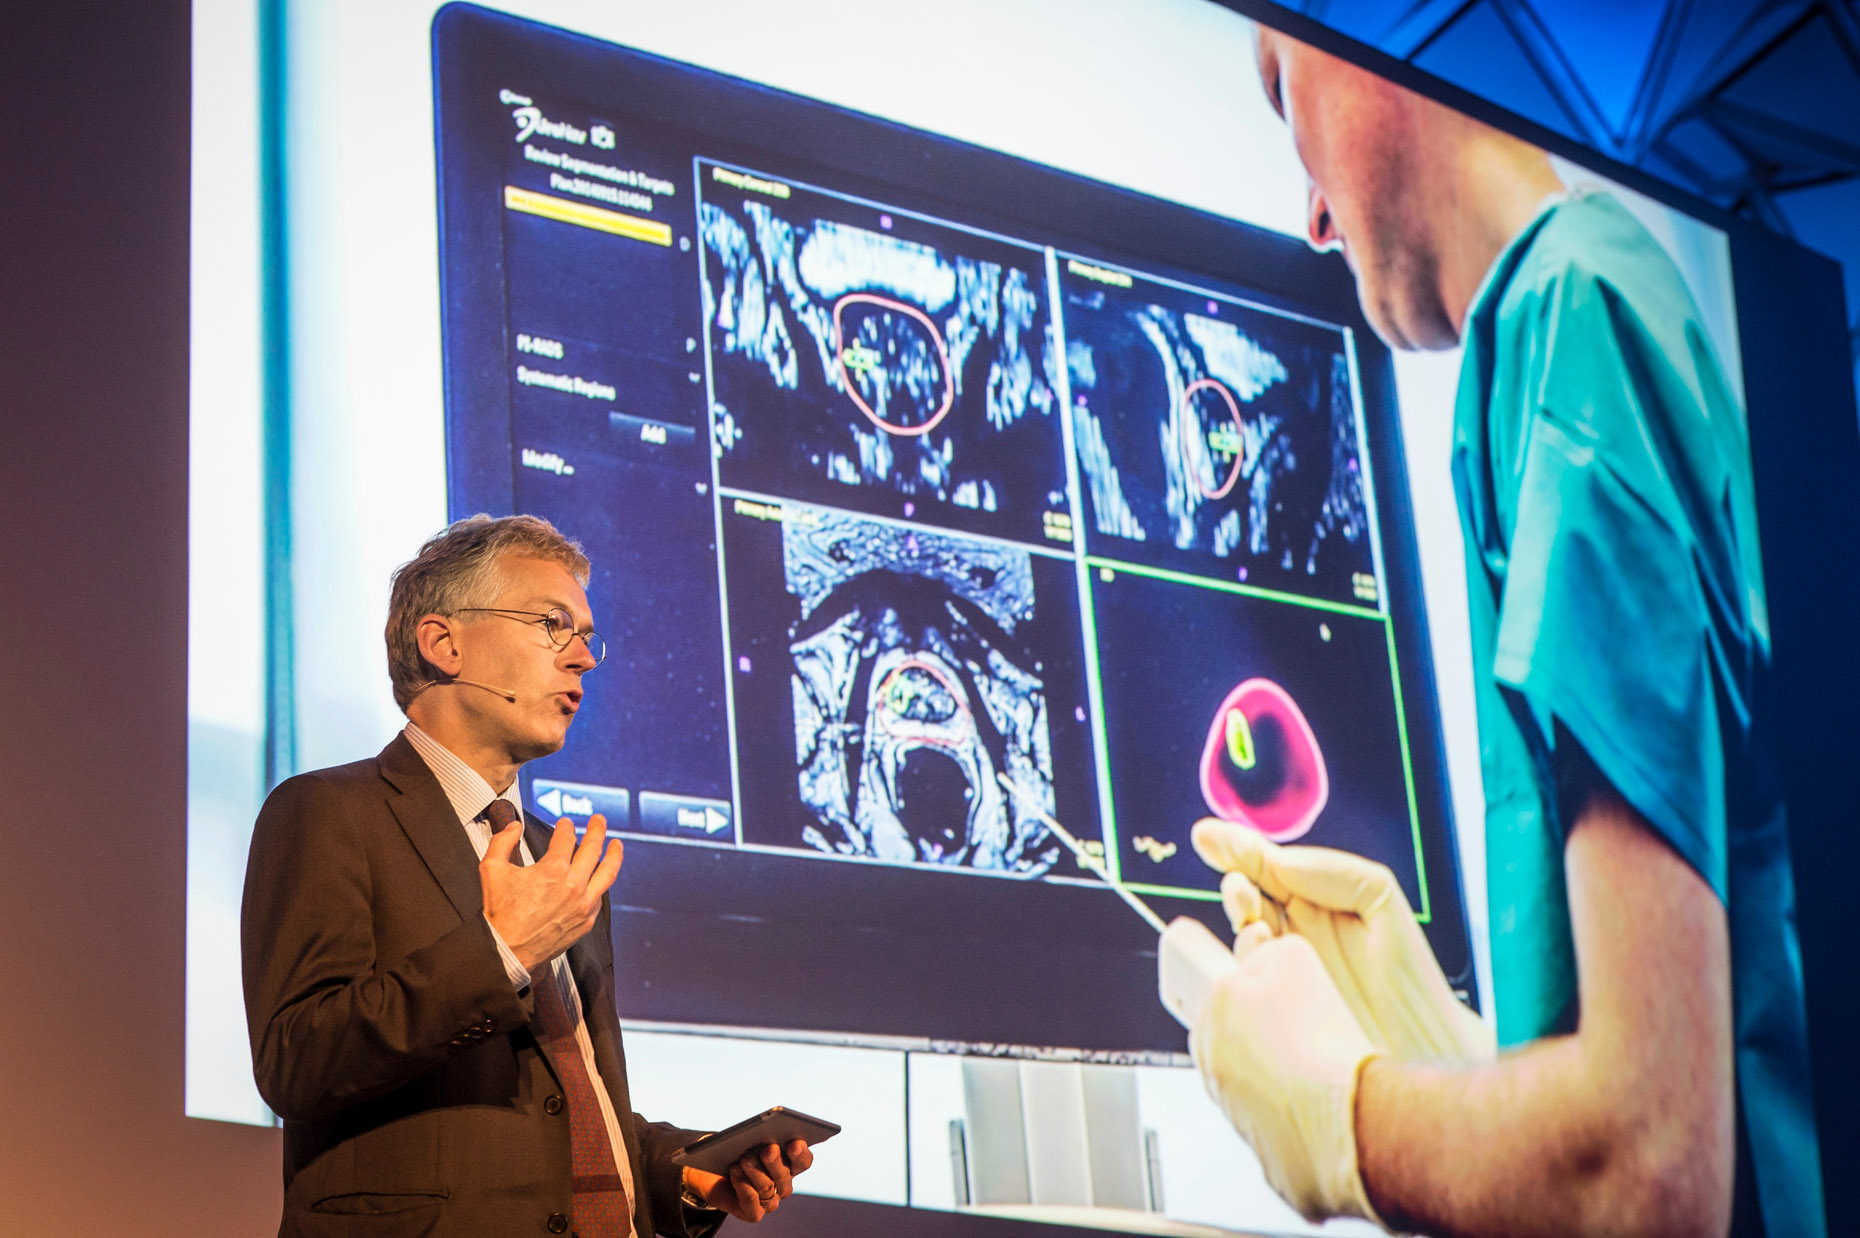 Philips_Innovation_Experience_2014_4